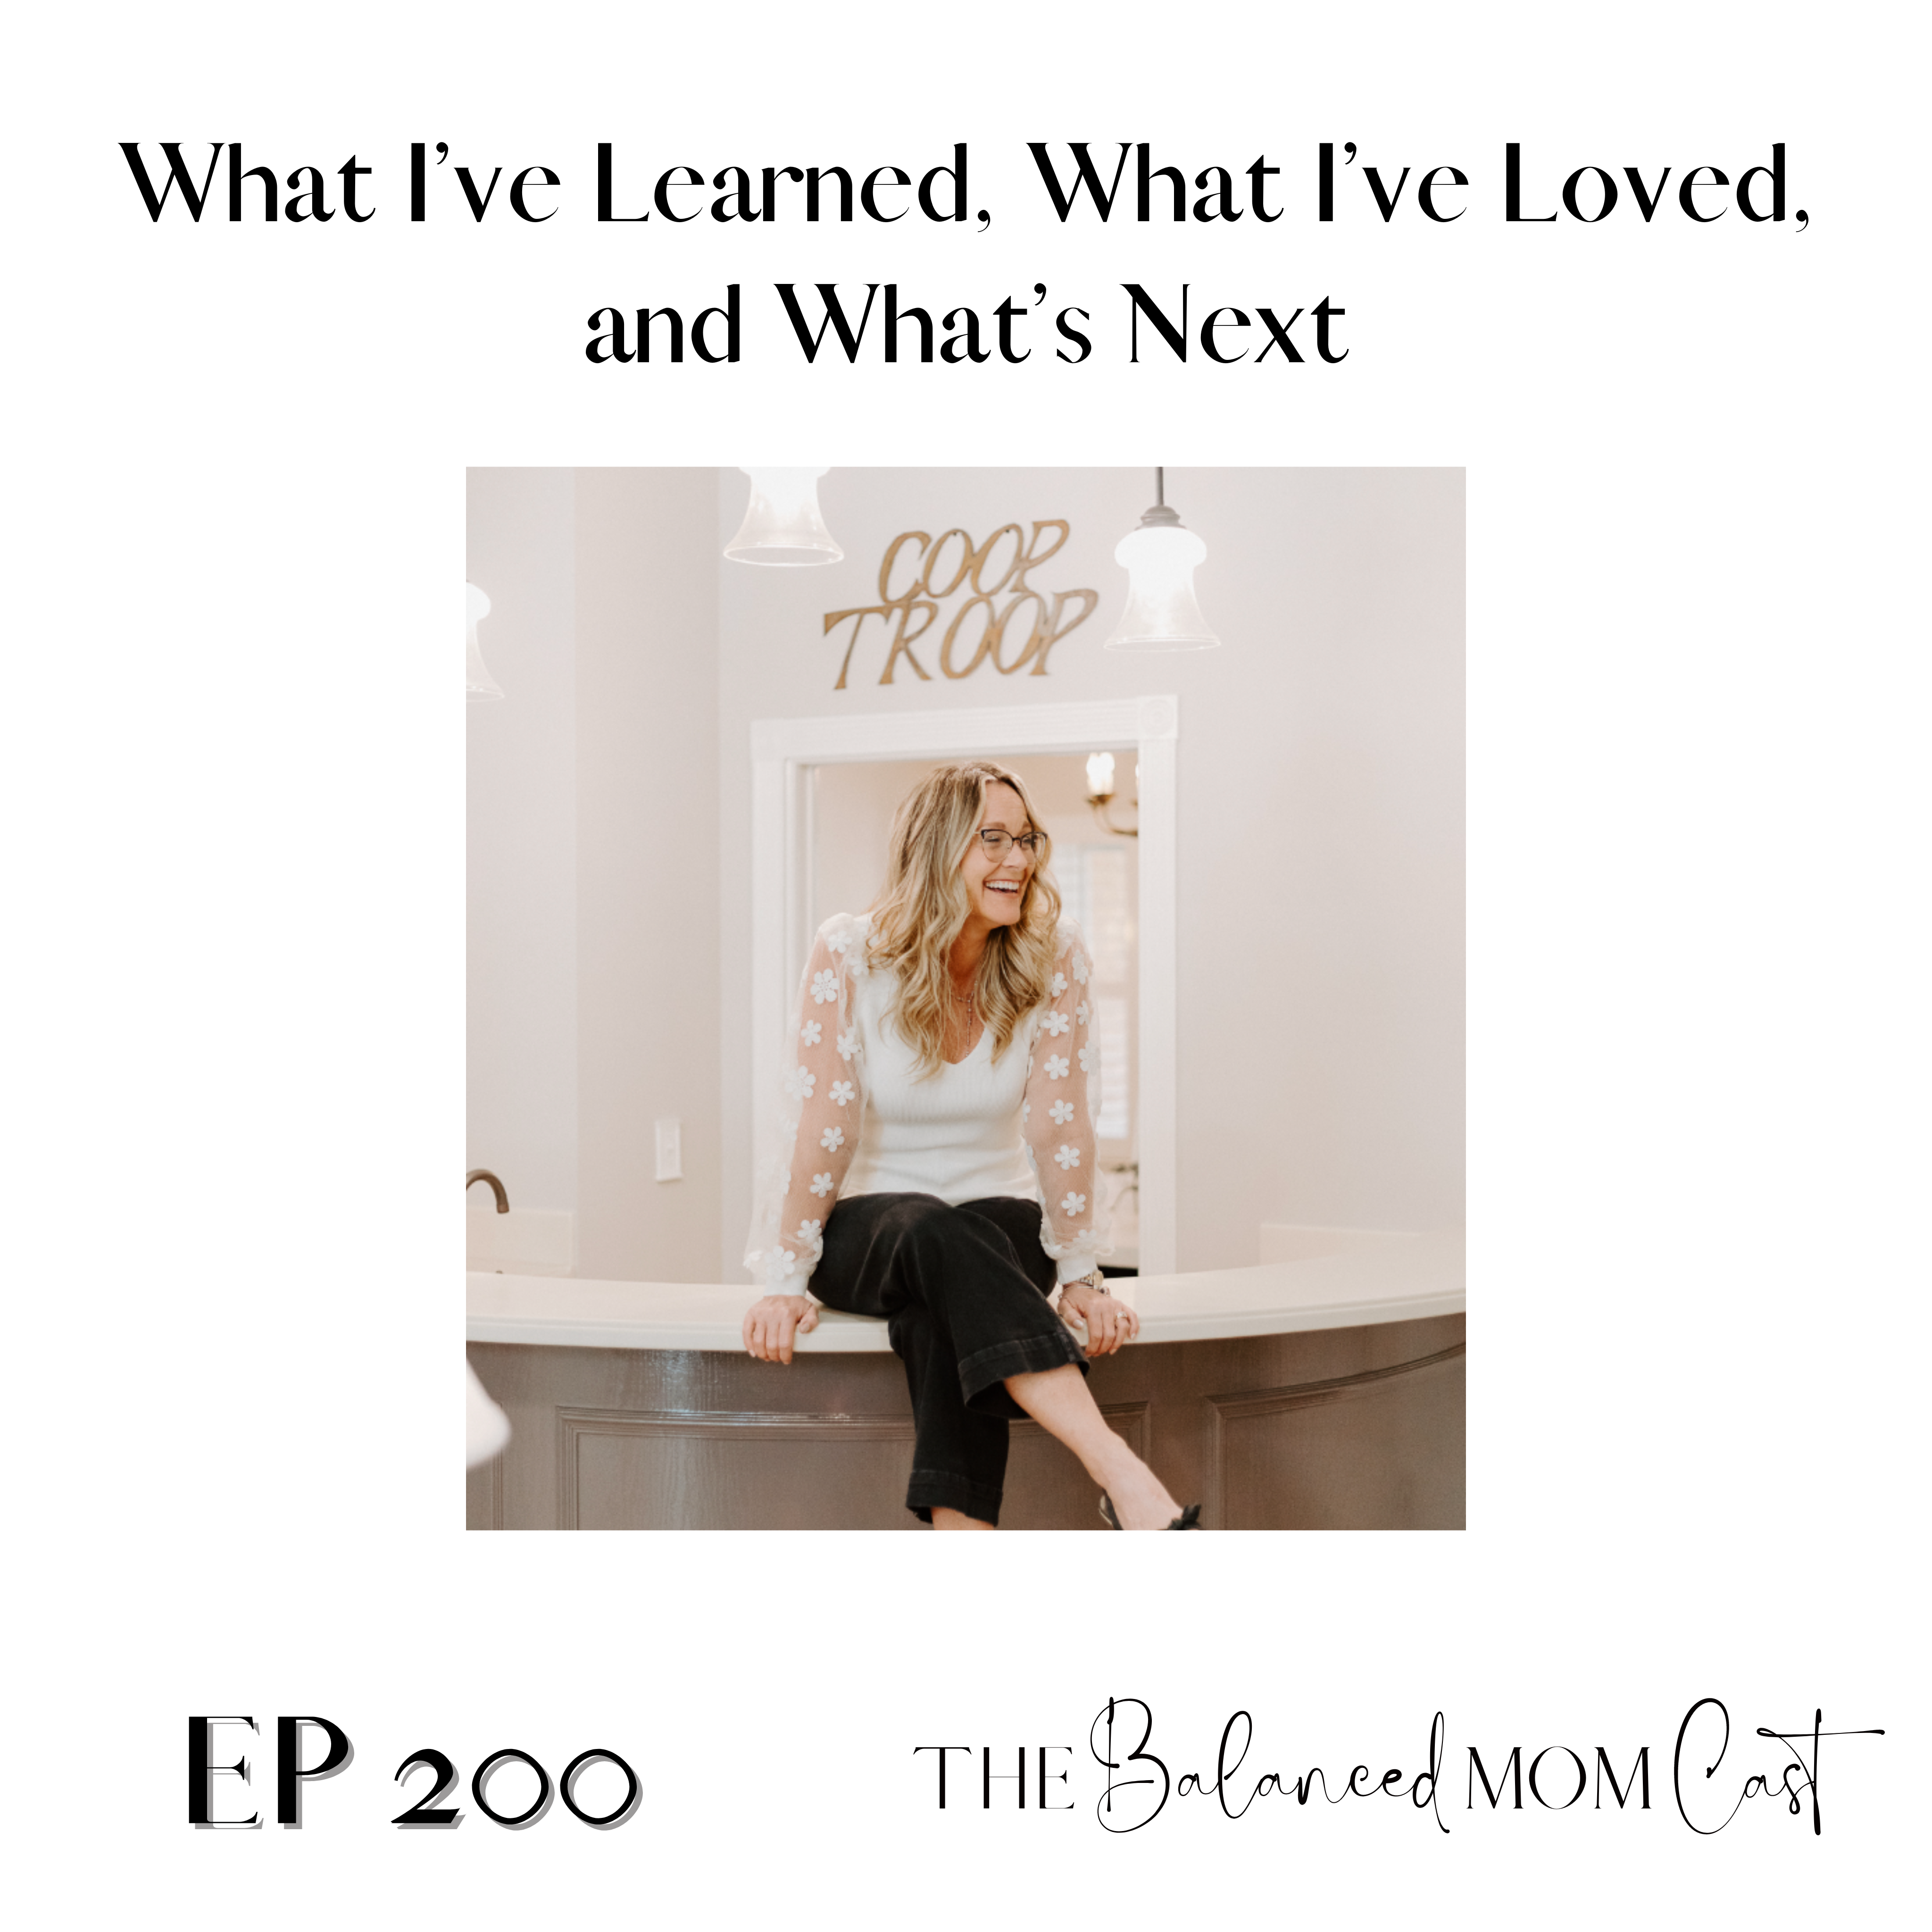 Ep 200: What I’ve Learned, What I’ve Loved, and What’s Next